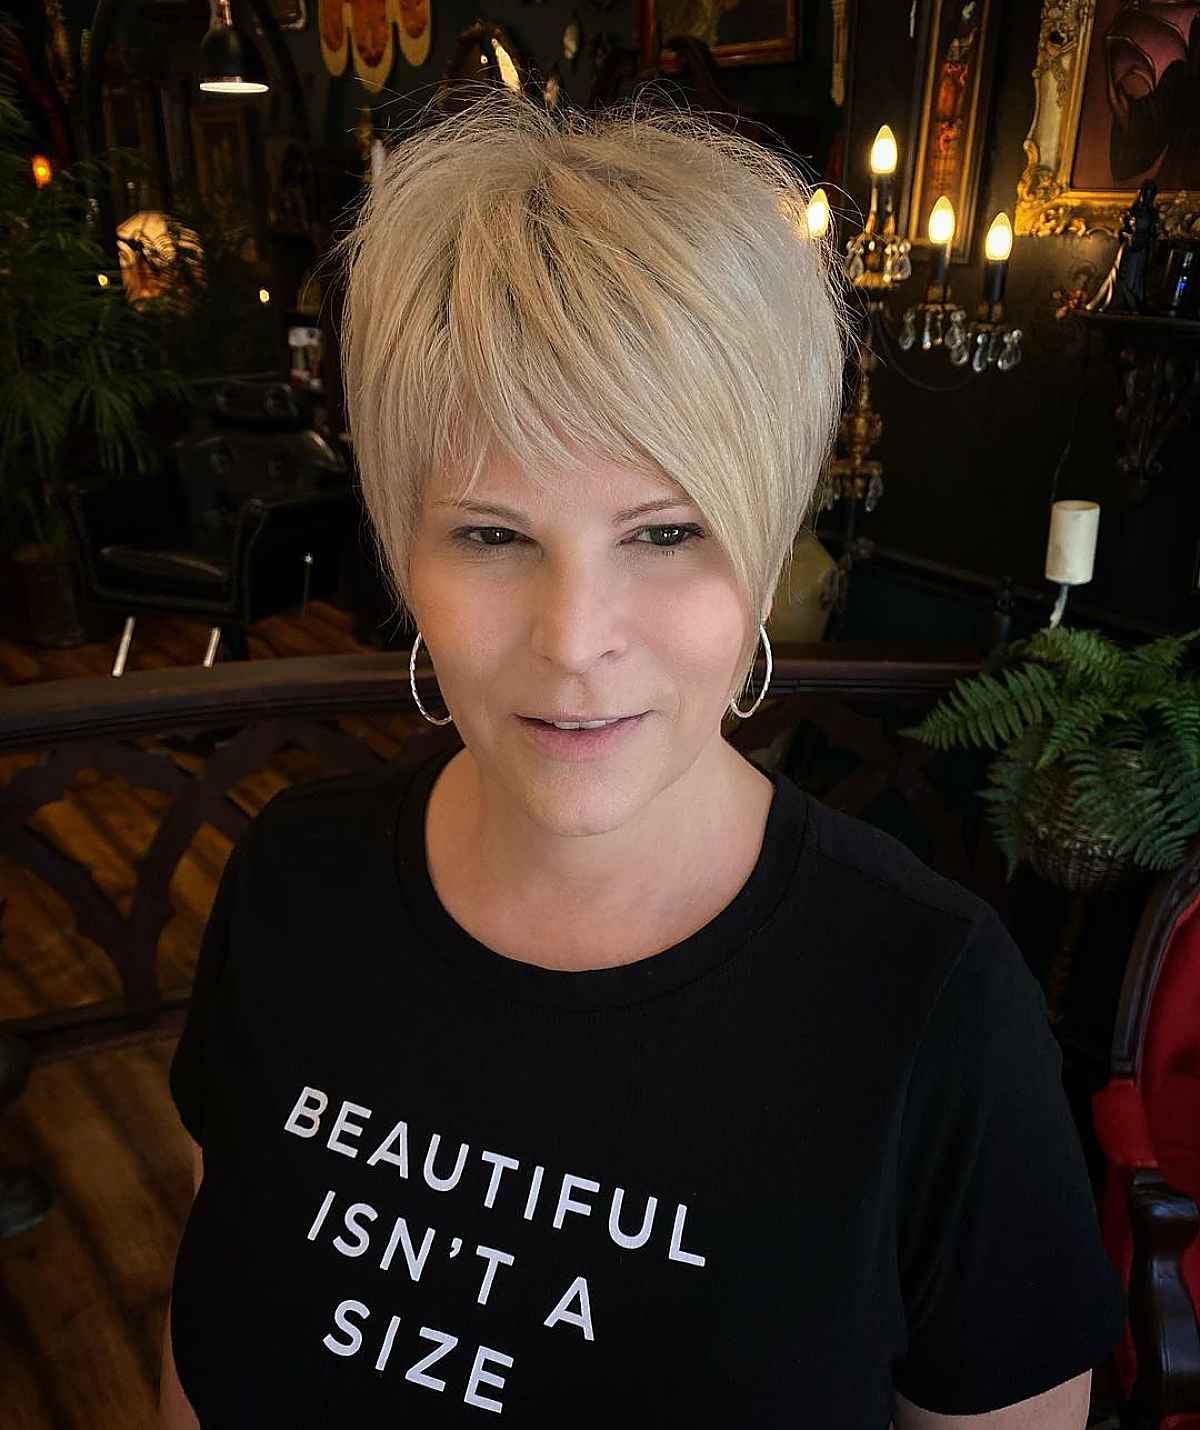 Stylish dirty blonde pixie for very short hair